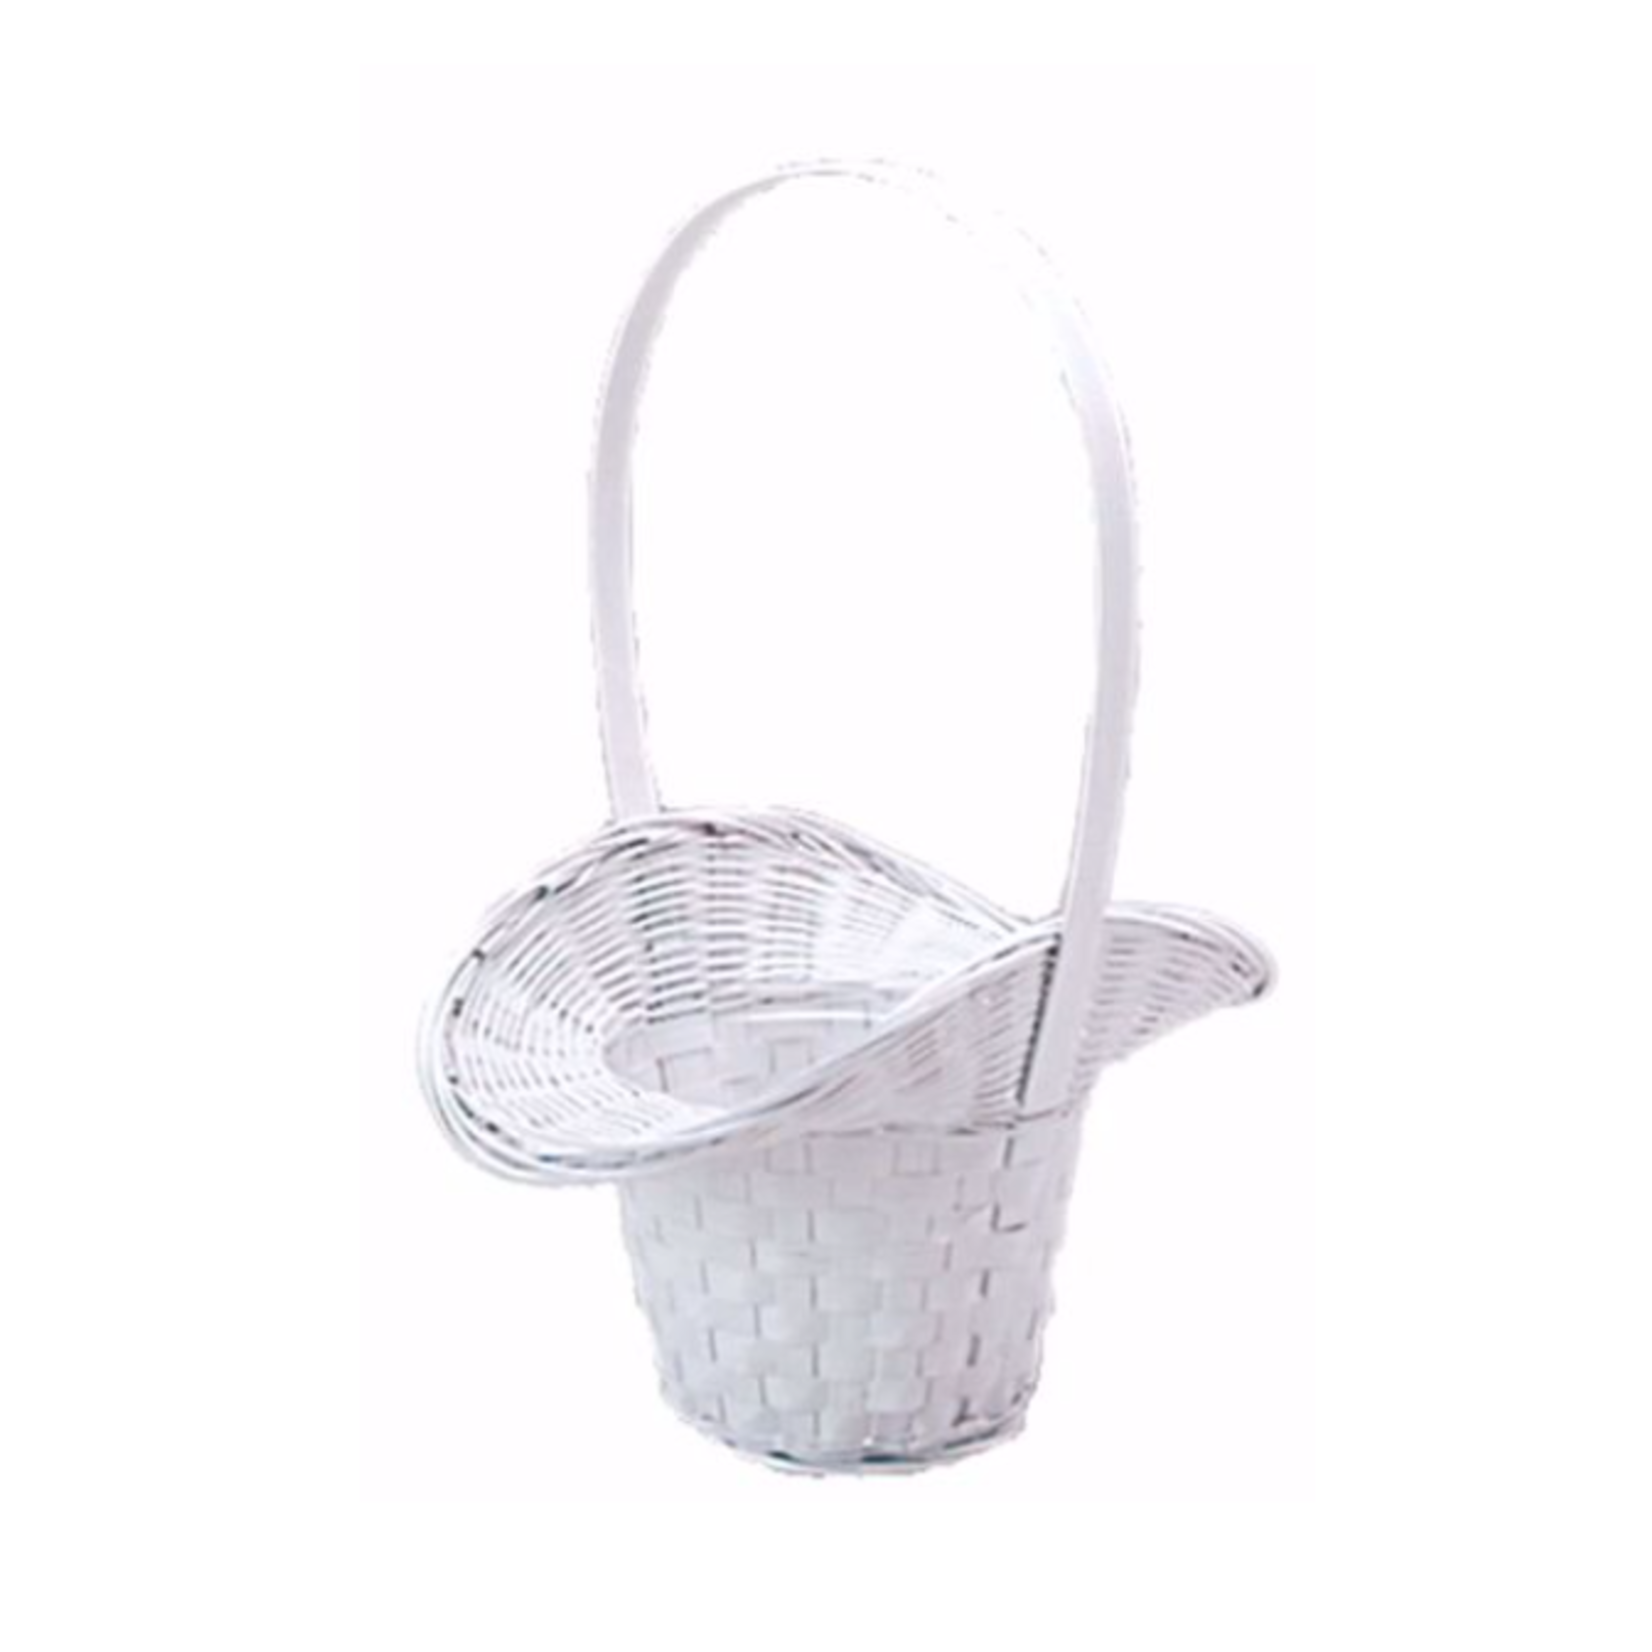 WHITE PRINCESS BASKET 4.75" Opening 3.25" High 9" x6" Flare Hard liner included